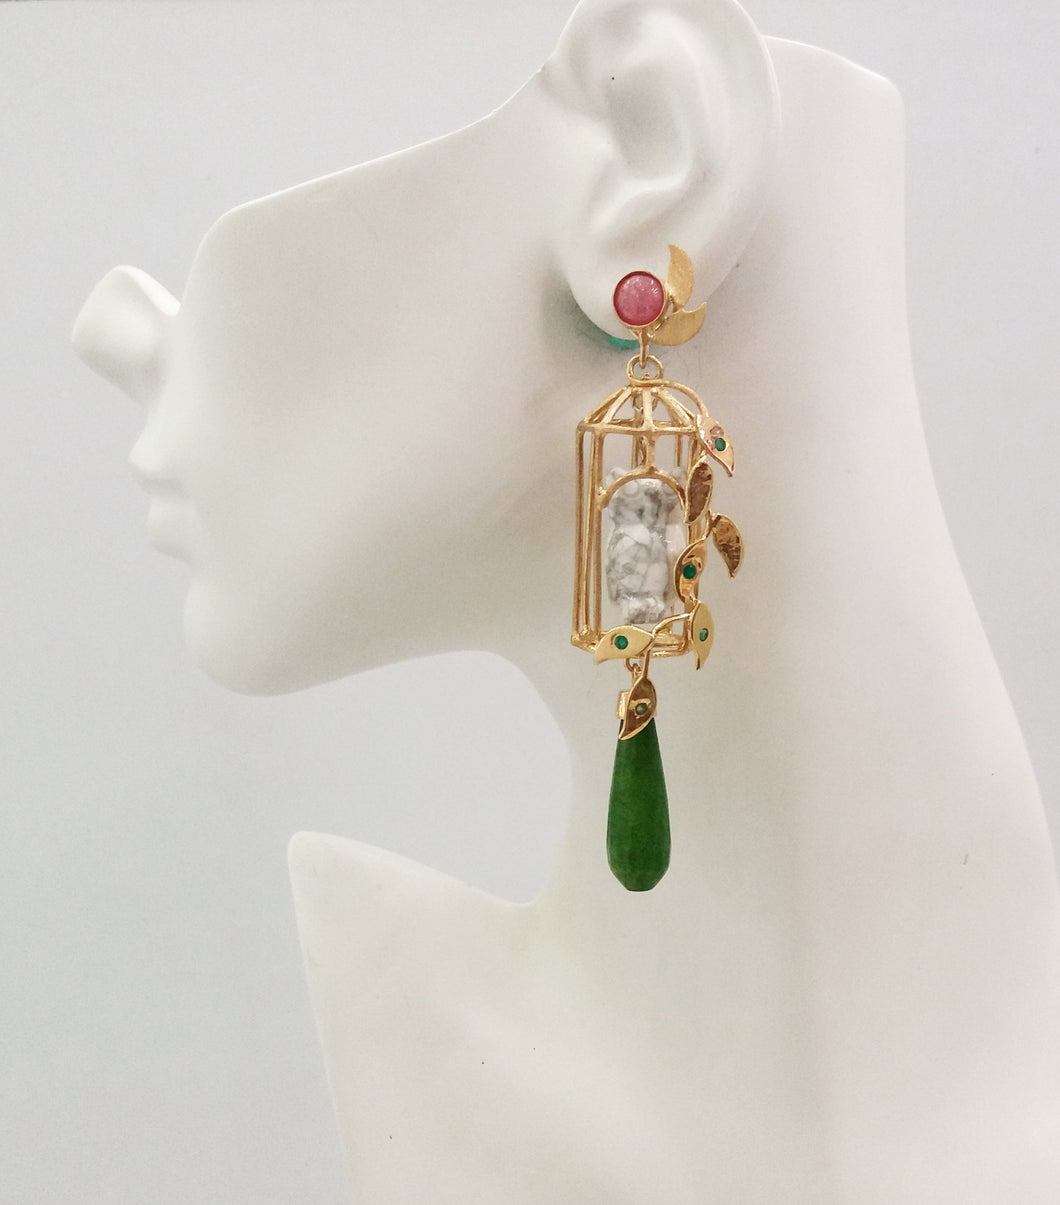 Gazebo Twinset Earrings  Pink Opal studs with detachable dangles in a birdcage design with white howlite carved owls & green jade drops.